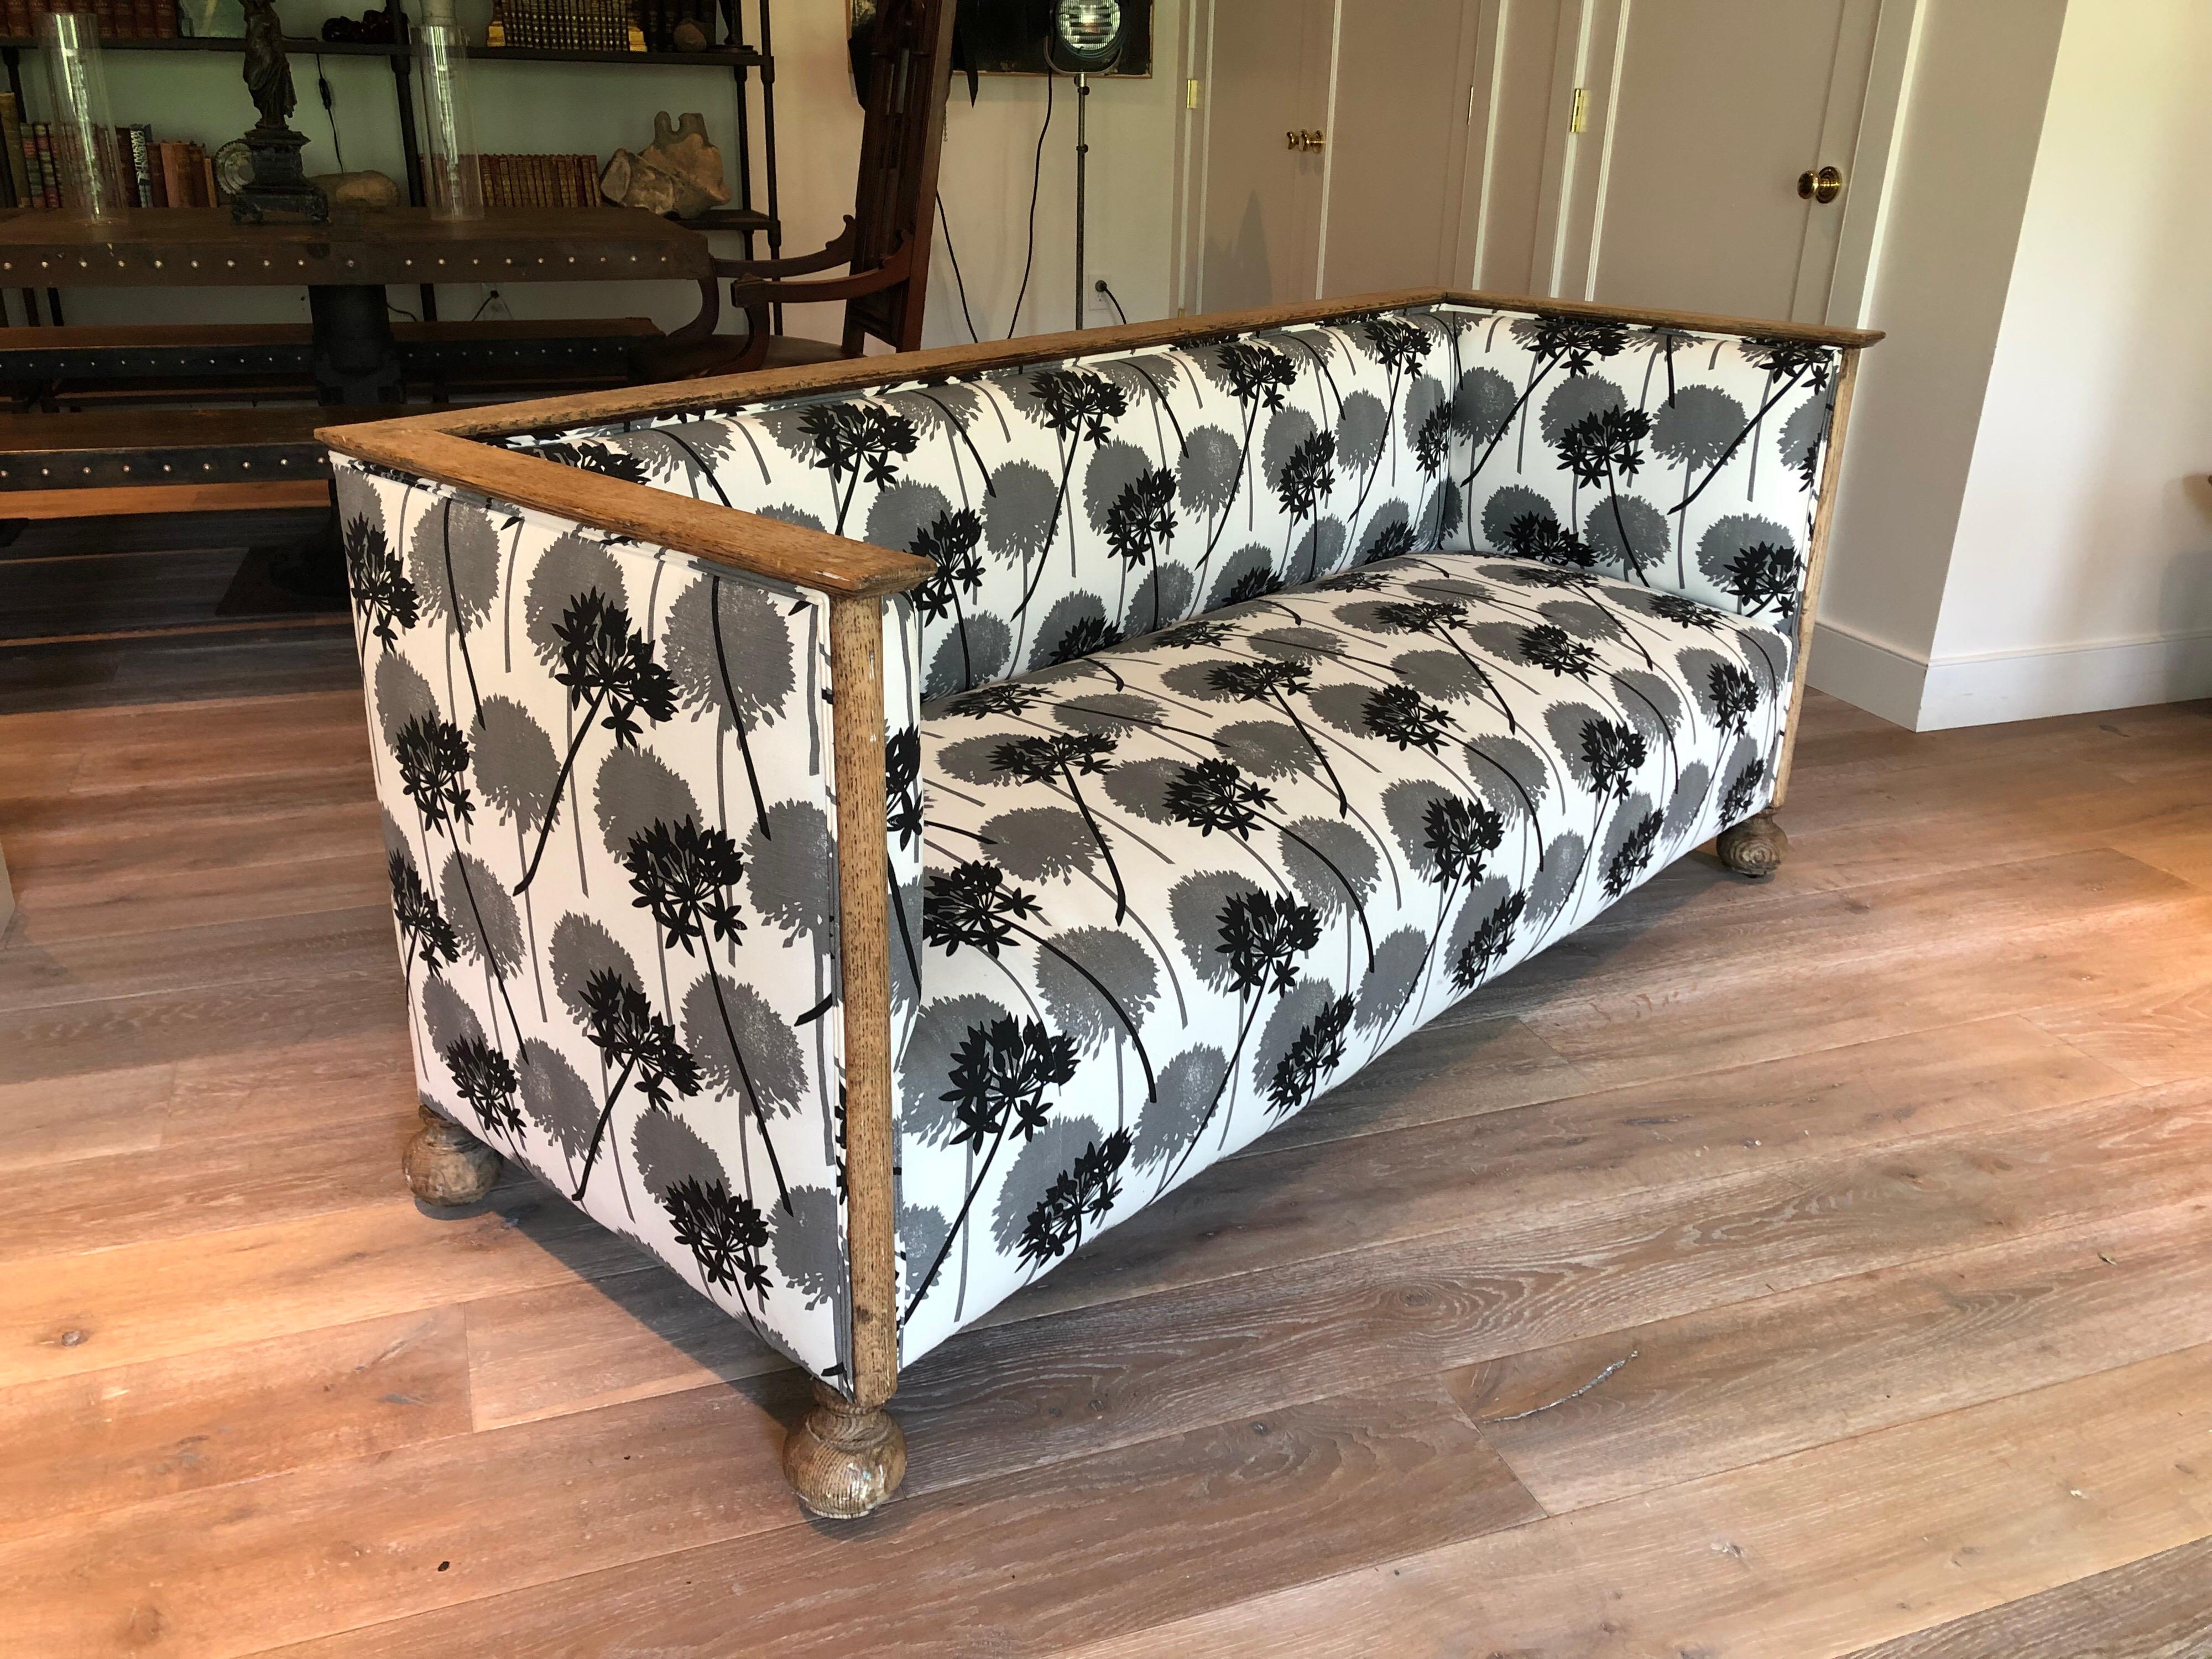 A French perused oak square frame sofa with bun feet. Upholstered in a contemporary allium print cotton canvas.